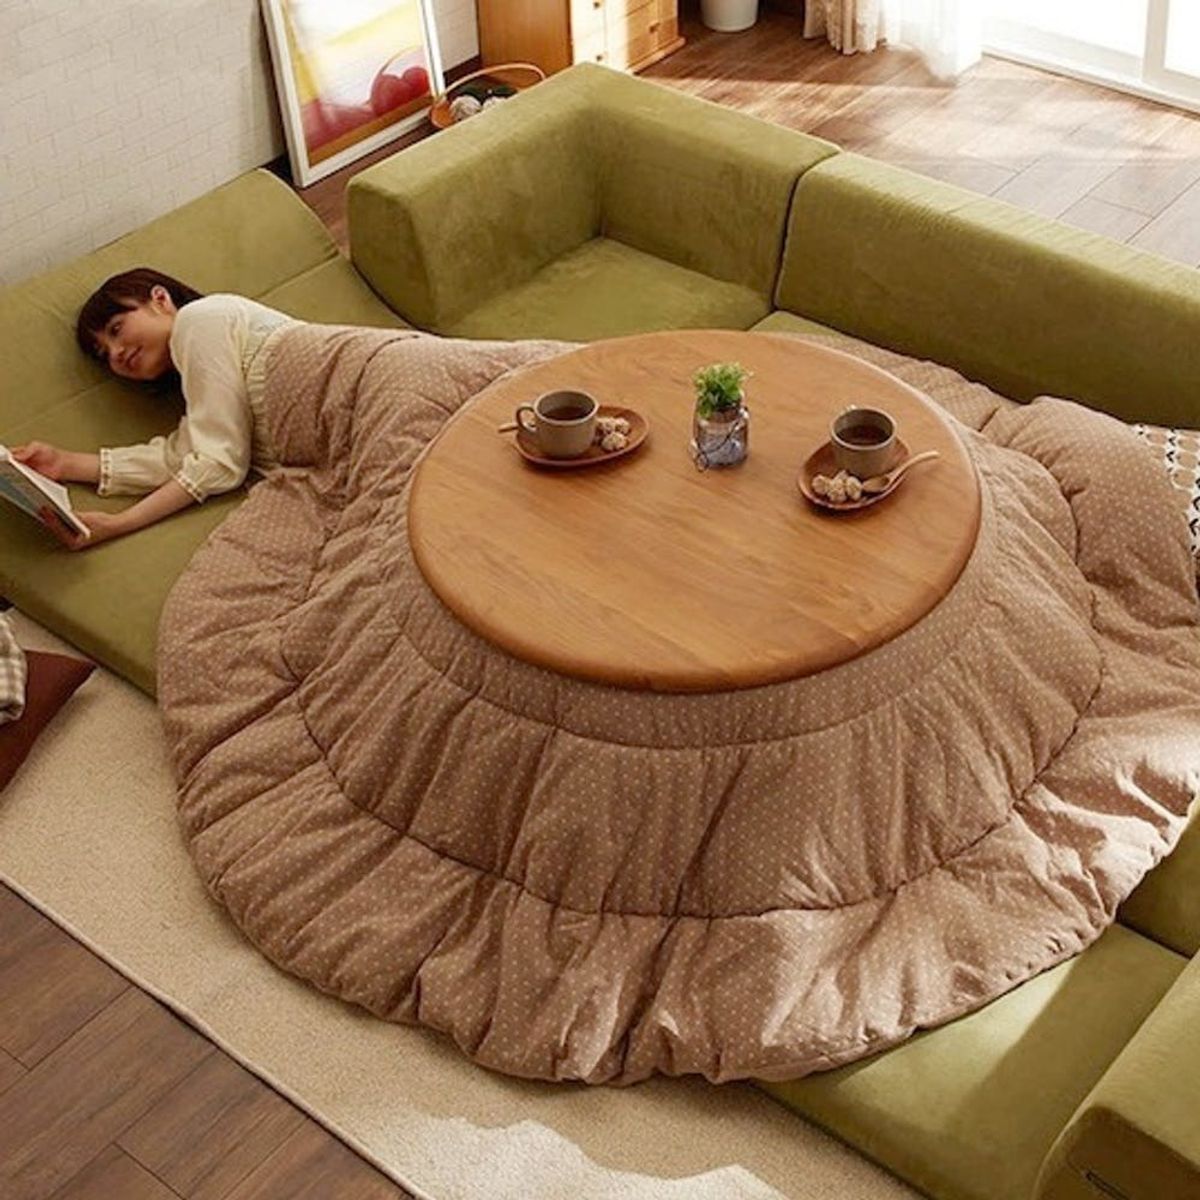 This Weird Japanese Blanket Table Wants to Give You the Best Nap EVER